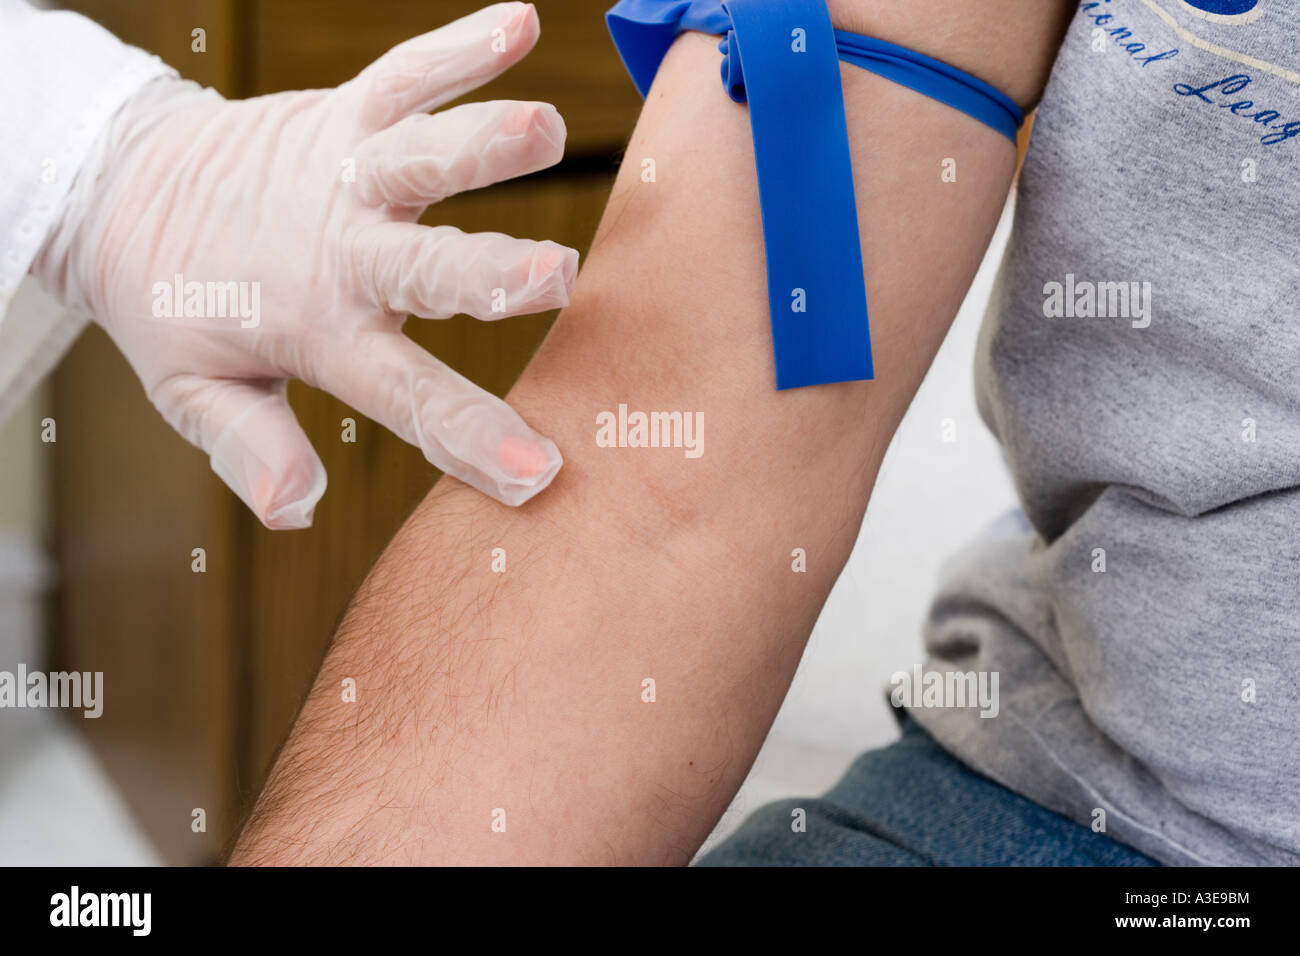 Health professional will wrap an elastic band around the upper arm to slow  the blood flow for a blood test Stock Photo - Alamy